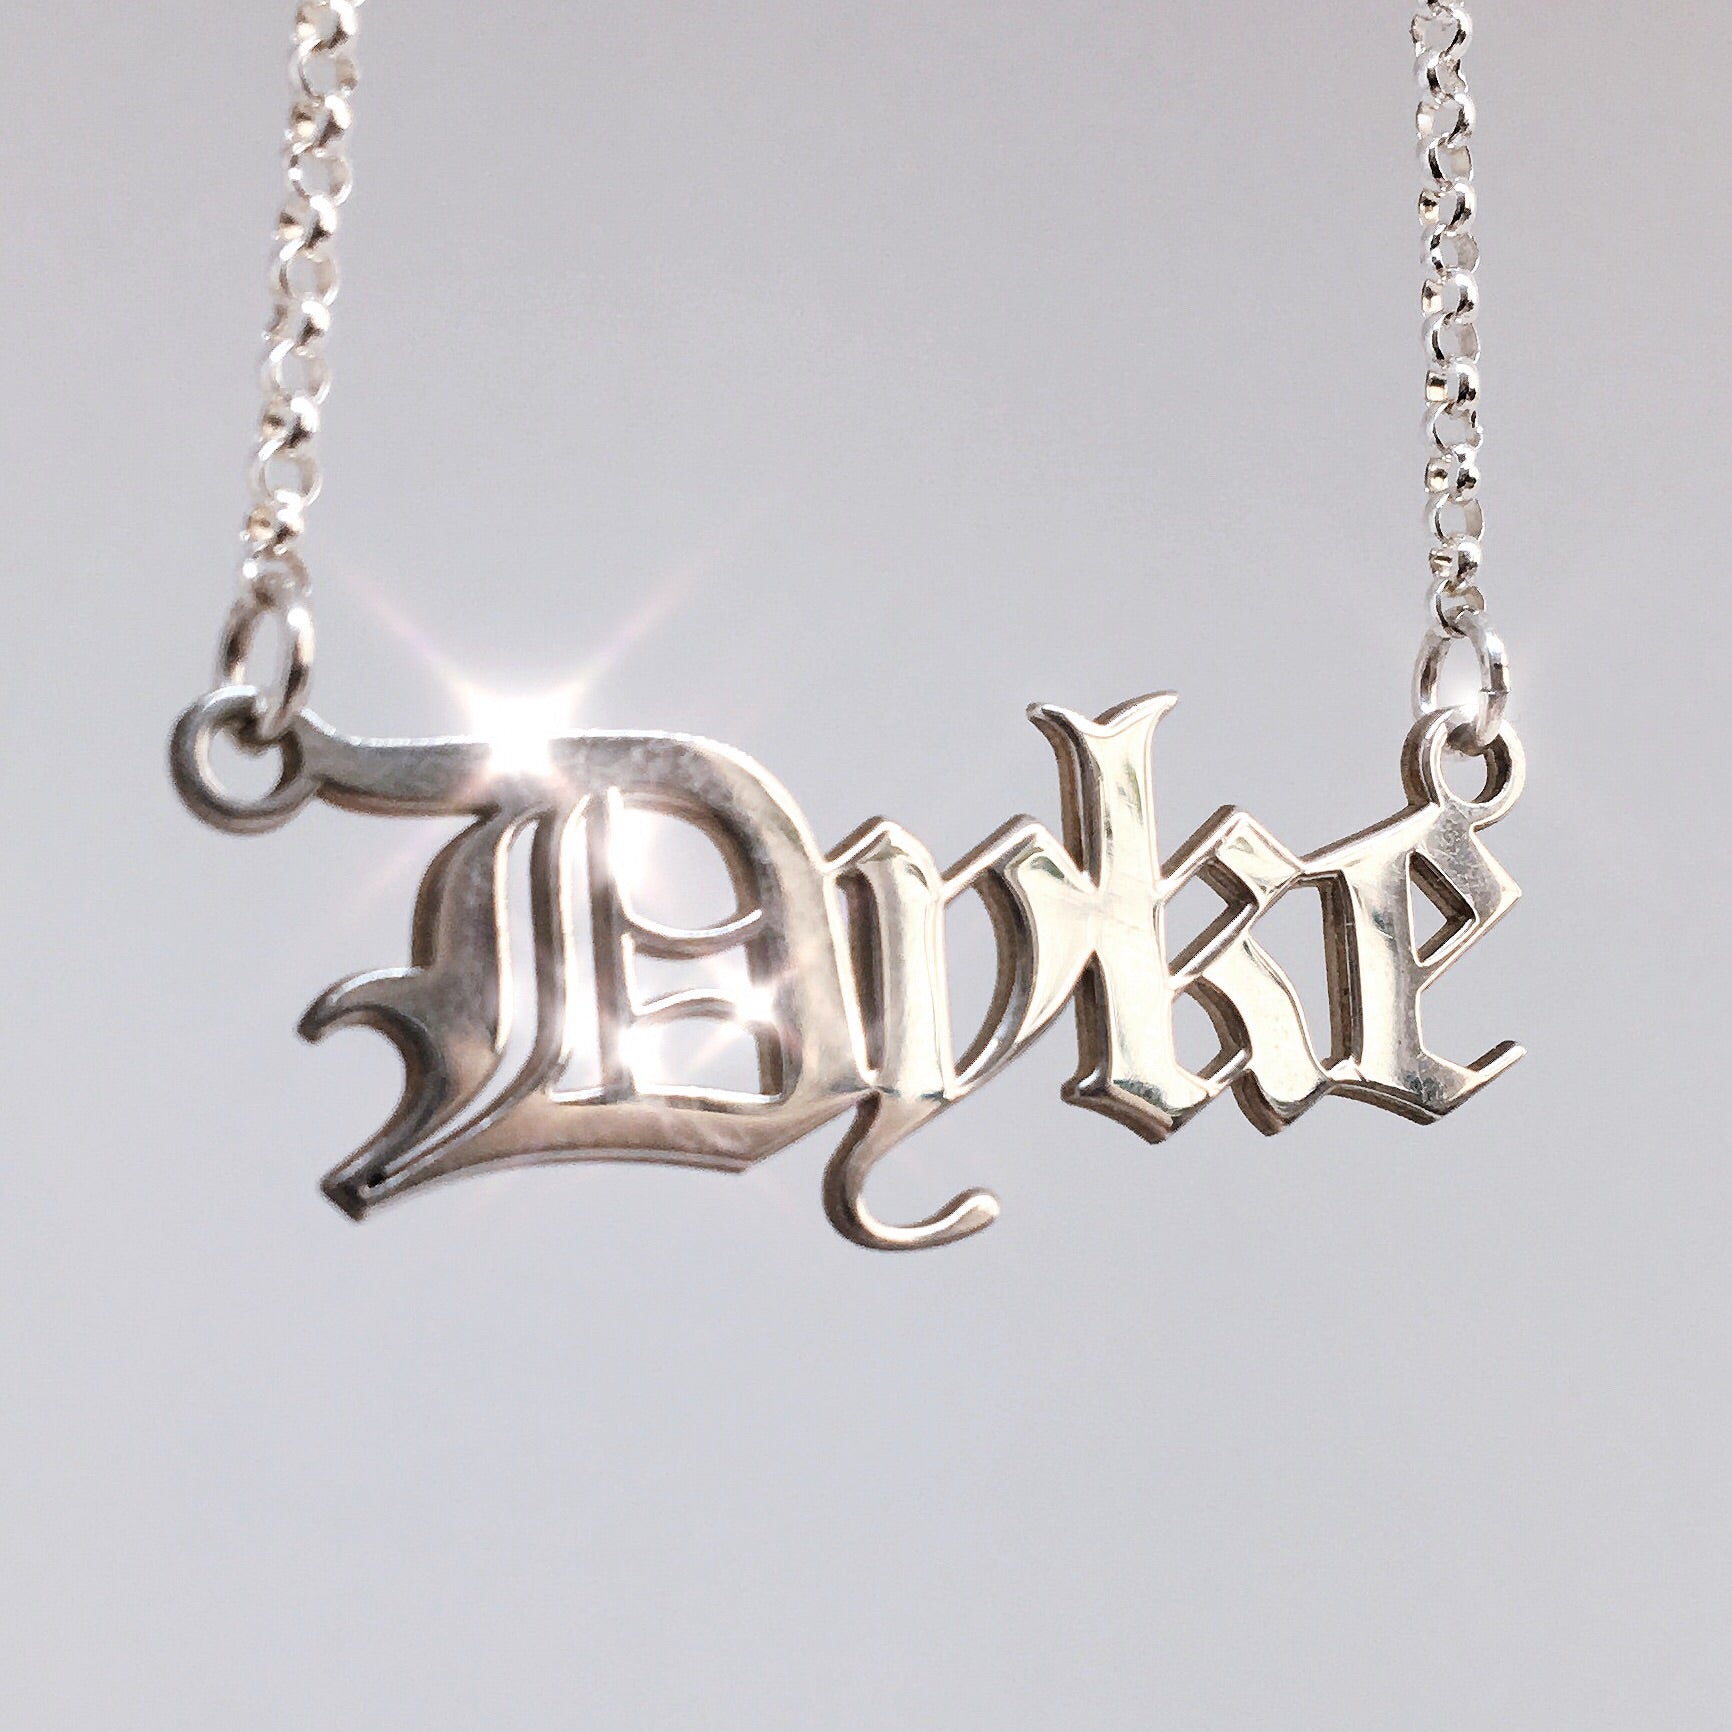 Gothic blackletter Dyke Necklace in solid sterling silver